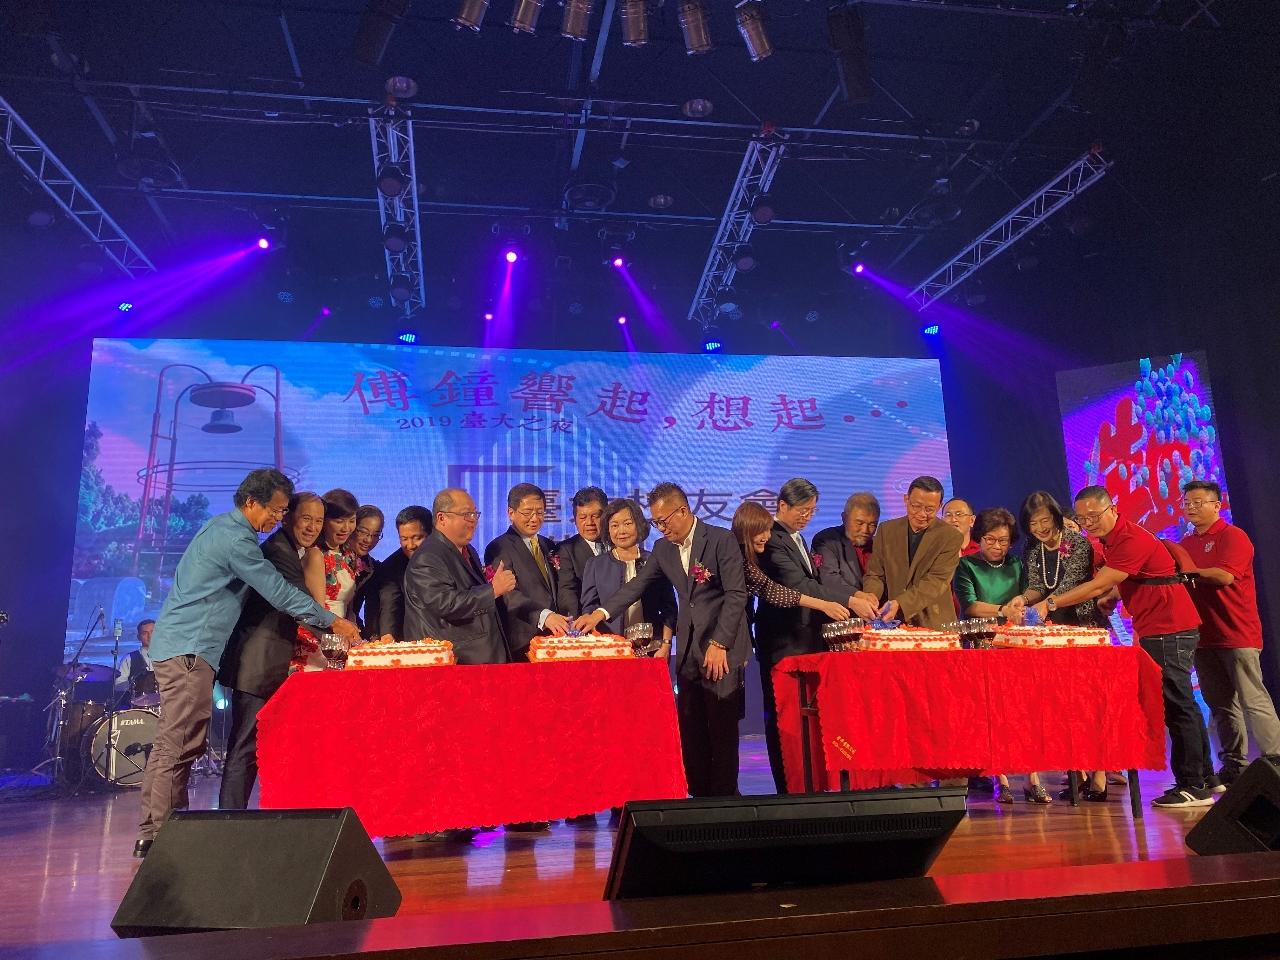 Representative Anne Hung (ninth from left) attends the cake cutting ceremony of 2019 anniversary dinner hosted by Alumni Association of National Taiwan University, Malaysia.